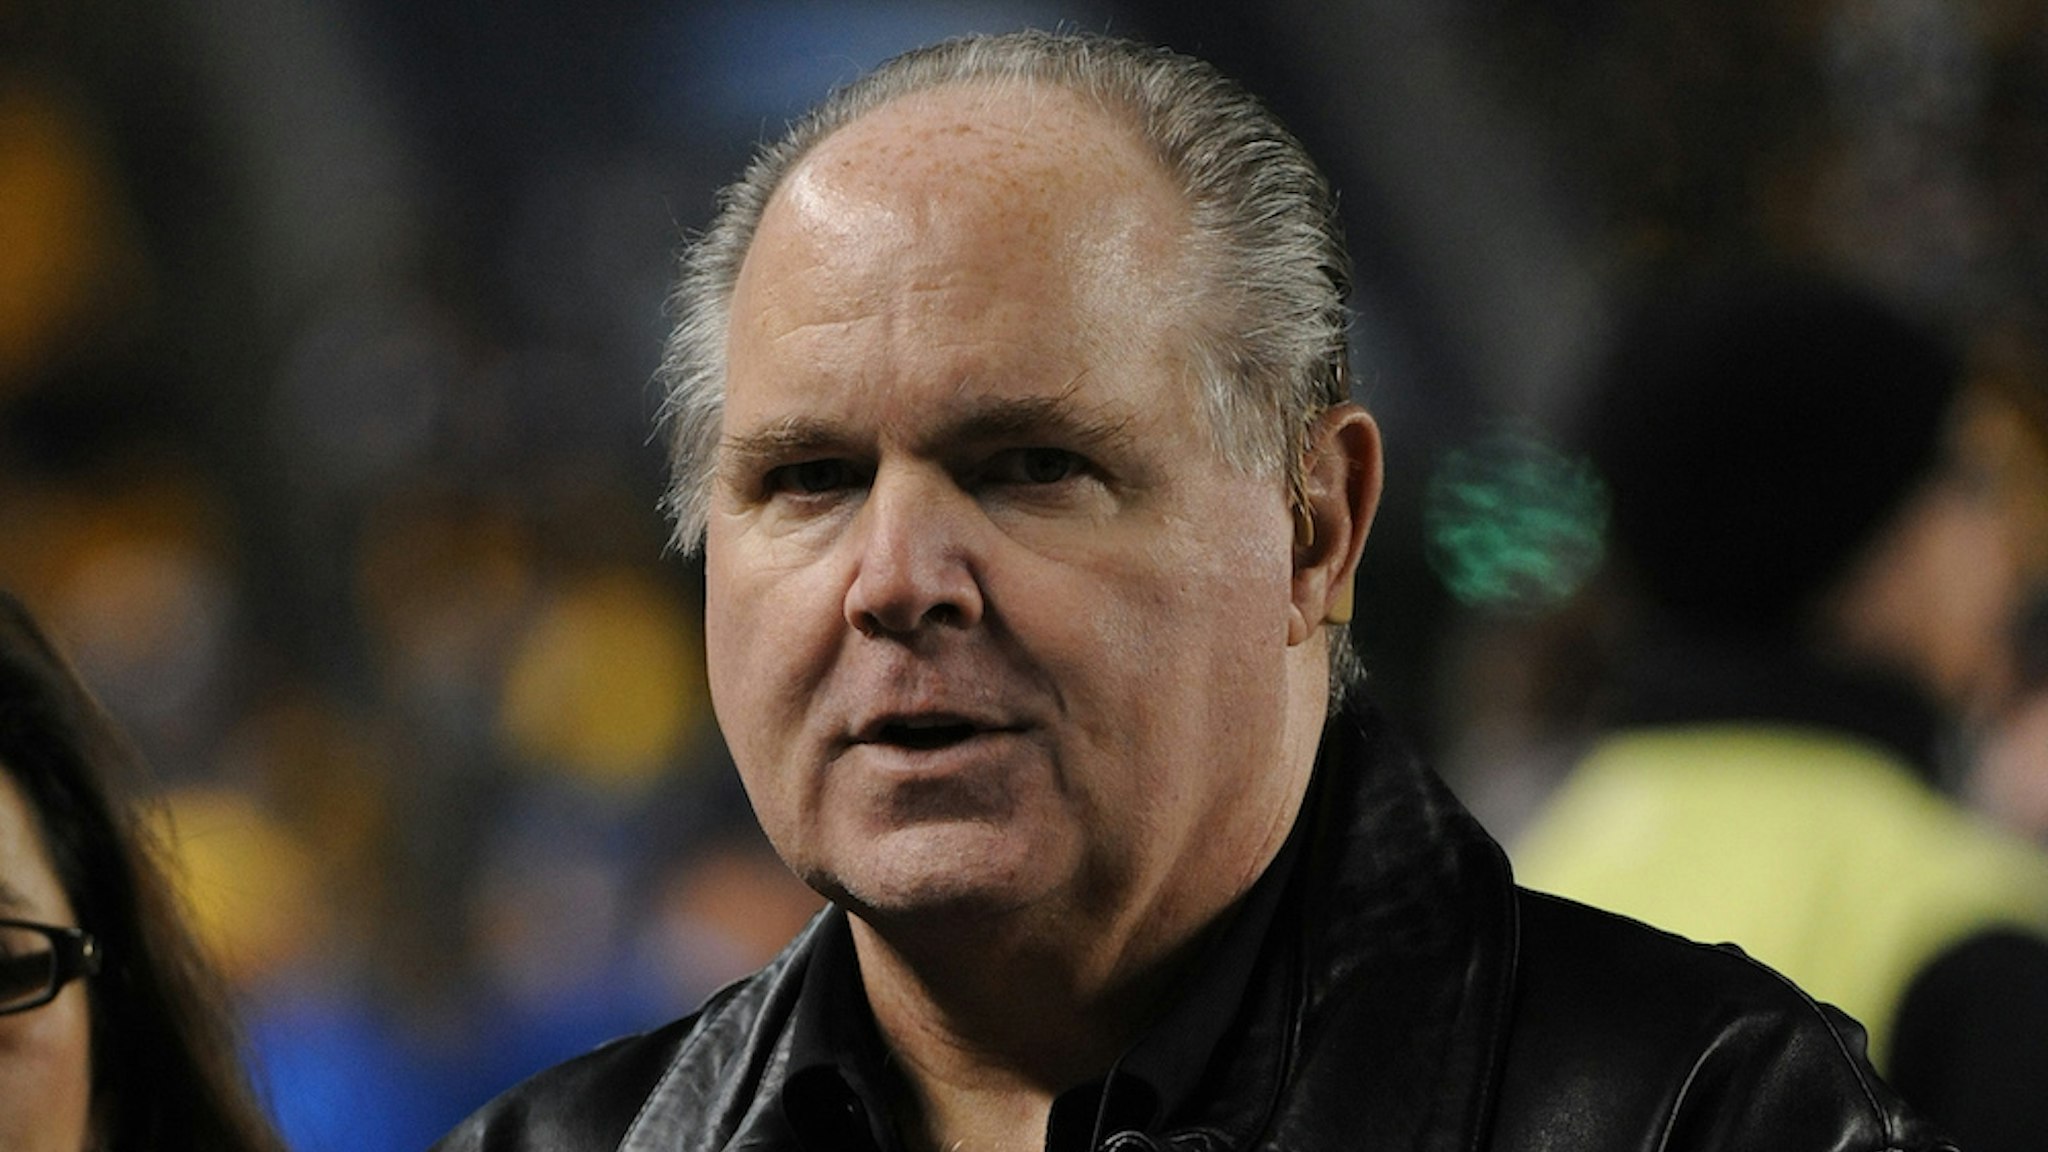 Radio talk show host and political commentator Rush Limbaugh looks on from the sideline before a National Football League game between the Baltimore Ravens and Pittsburgh Steelers at Heinz Field on November 6, 2011 in Pittsburgh, Pennsylvania. The Ravens defeated the Steelers 23-20. (Photo by George Gojkovich/Getty Images)